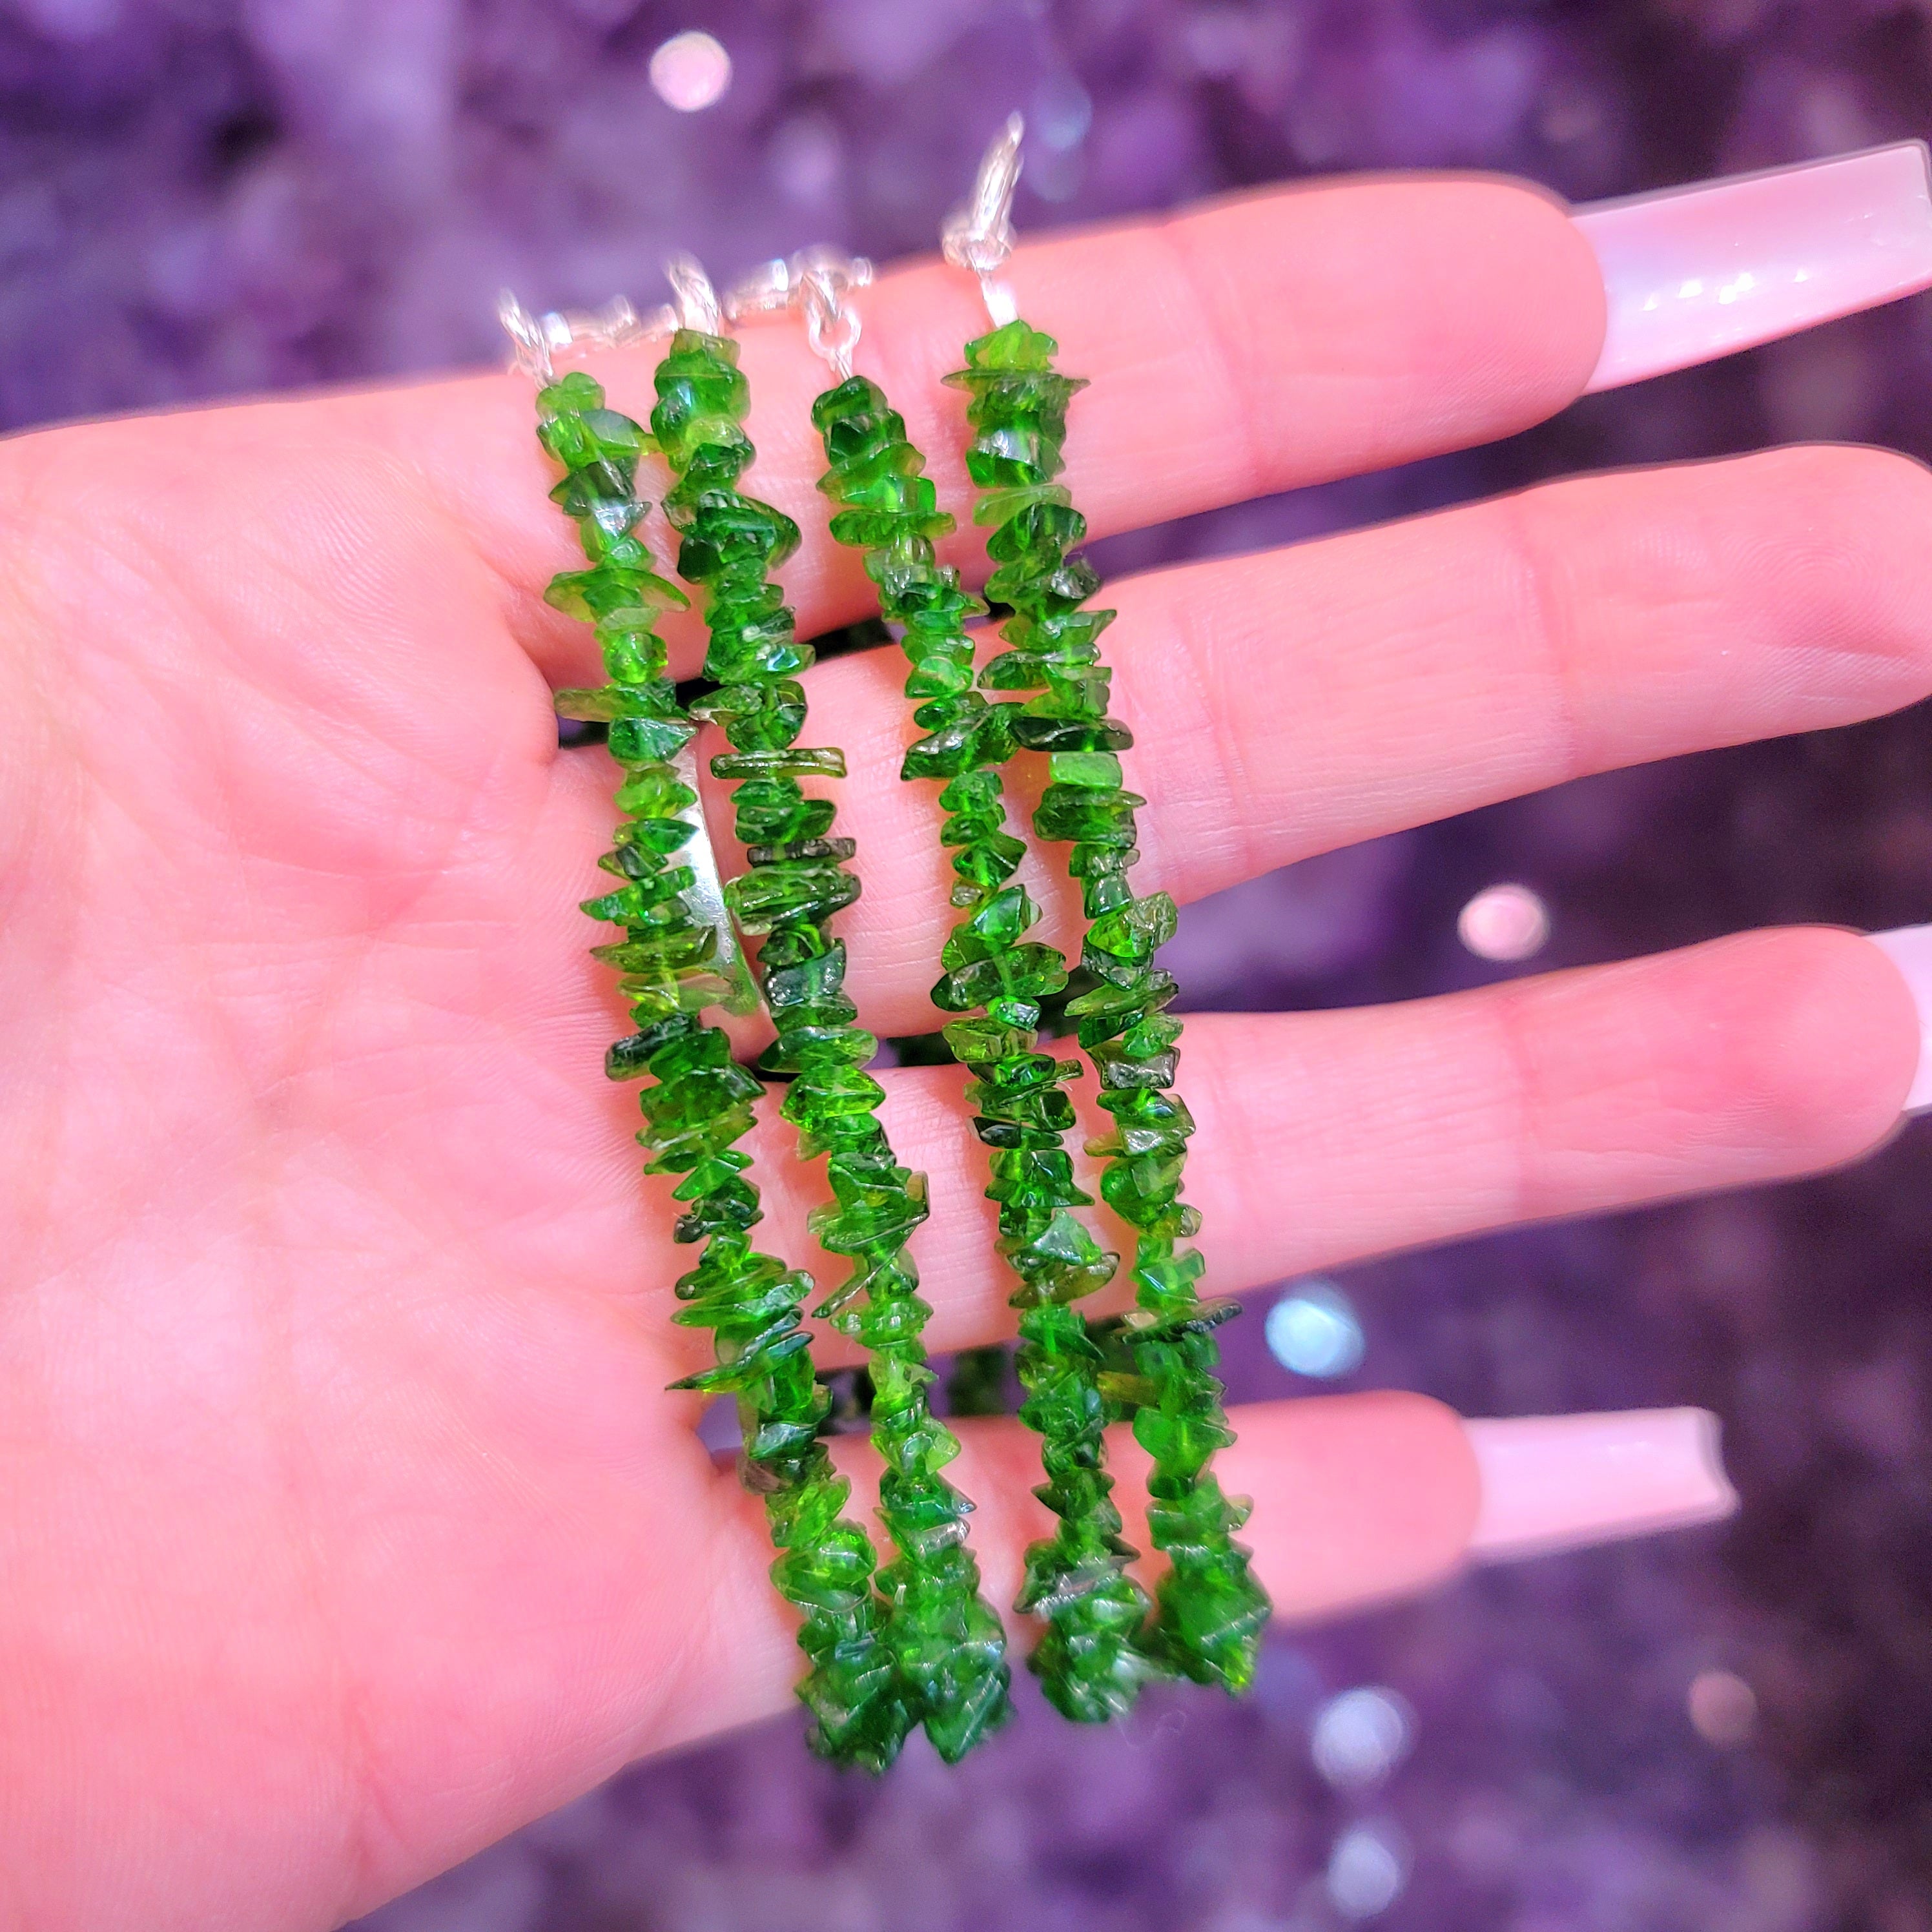 Chrome Diopside Chip Bracelet for Compassion and Forgiveness